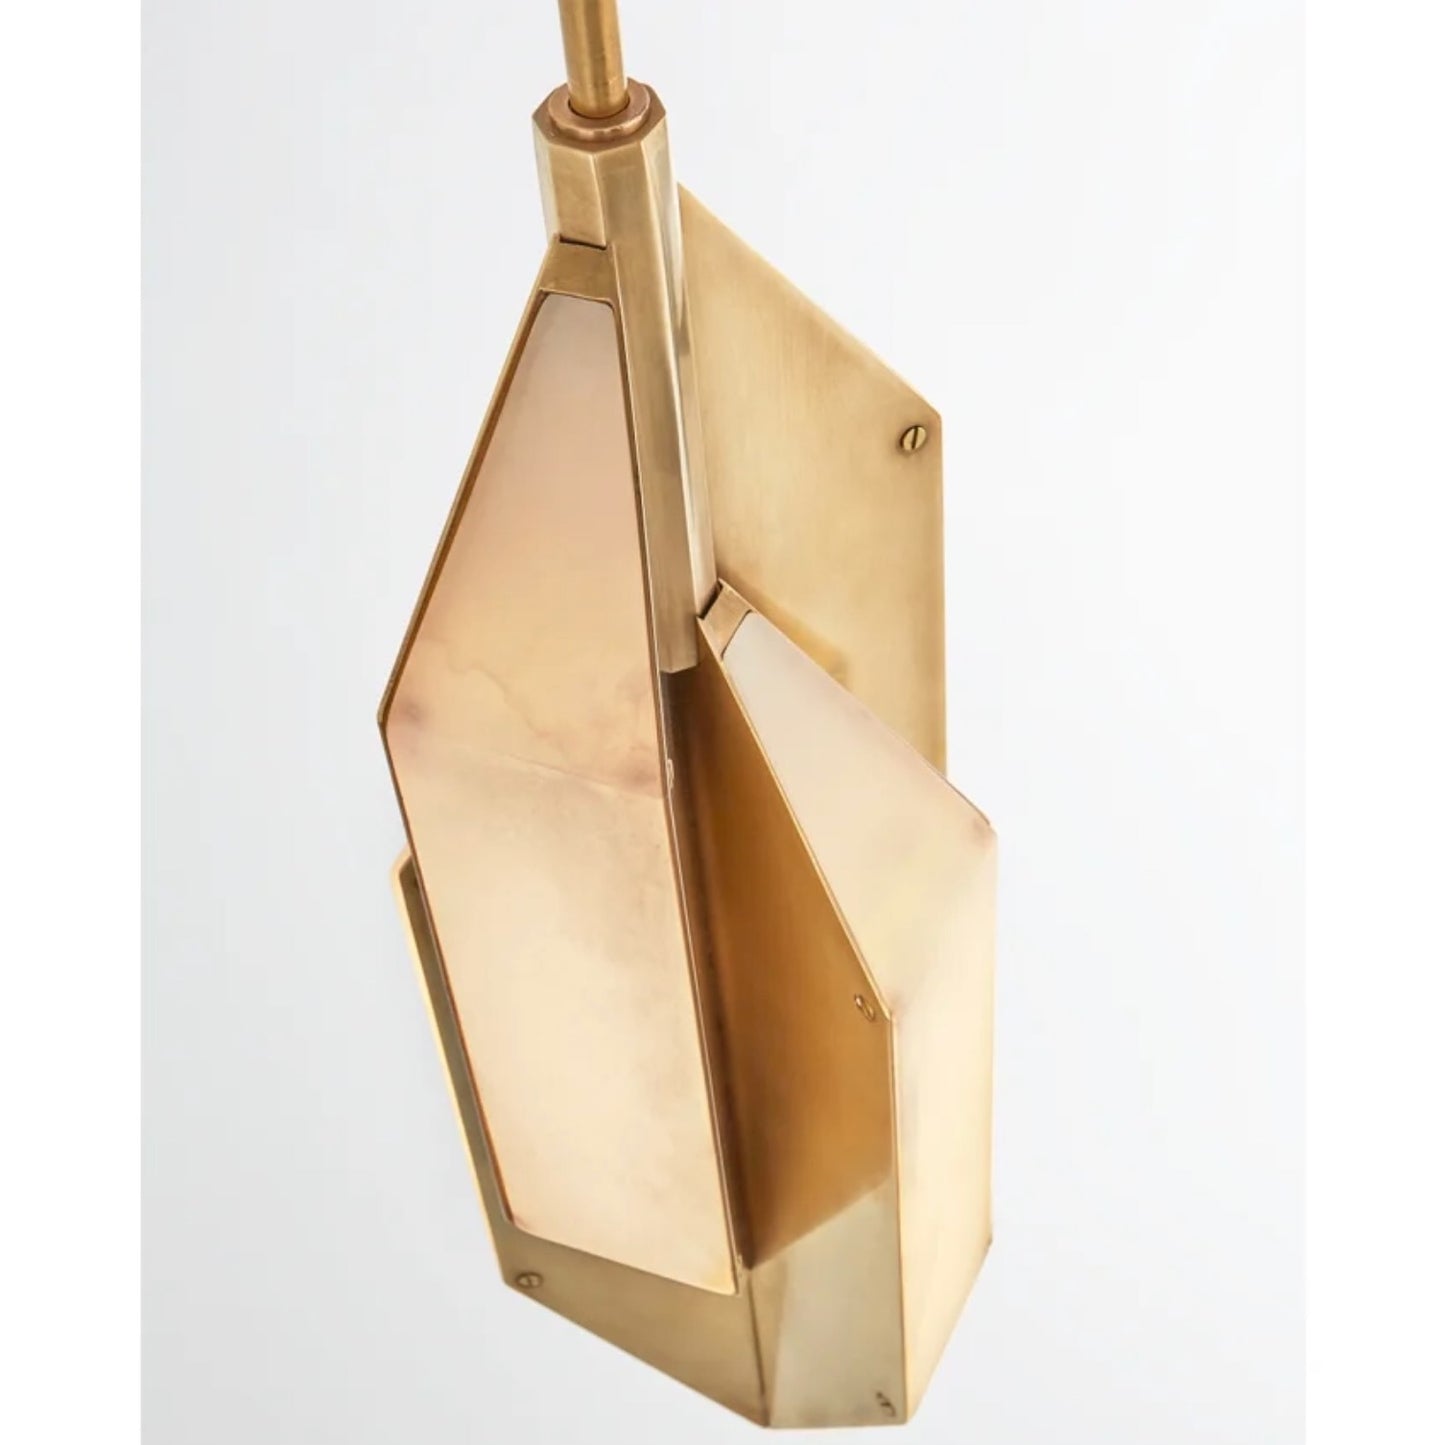 Visual Comfort & Co. | Kelly Wearstler Ophelion Small Pendant with Alabaster